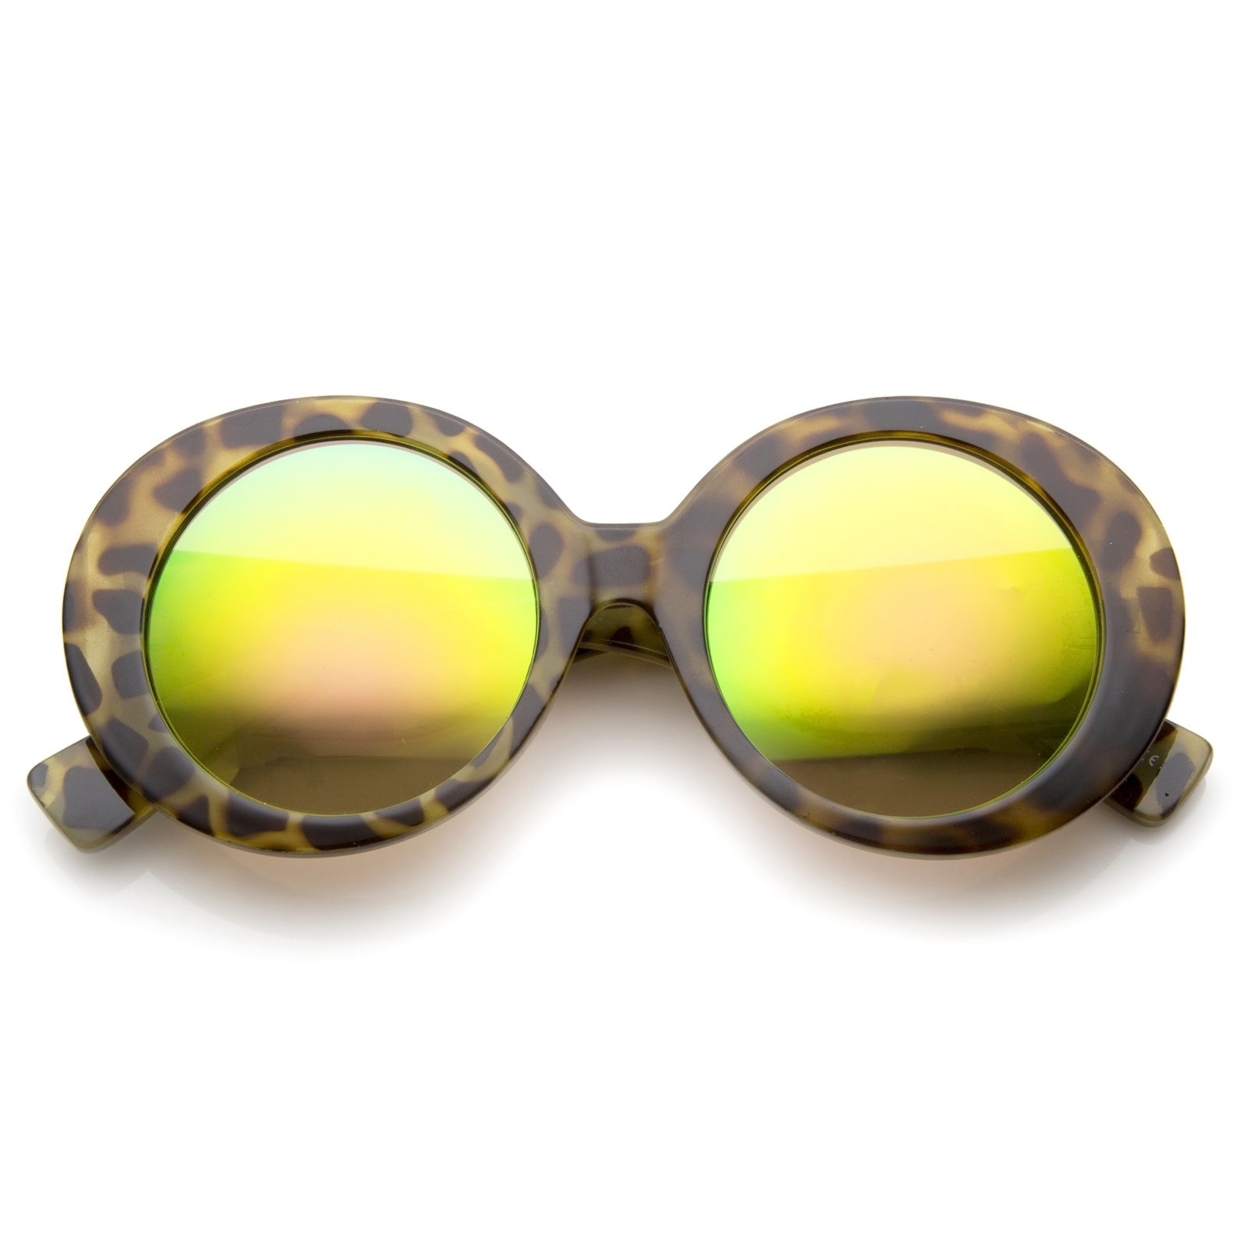 High Fashion Chunky Colored Mirror Round Oversize Sunglasses 50mm - Tortoise / Green-Blue Mirror